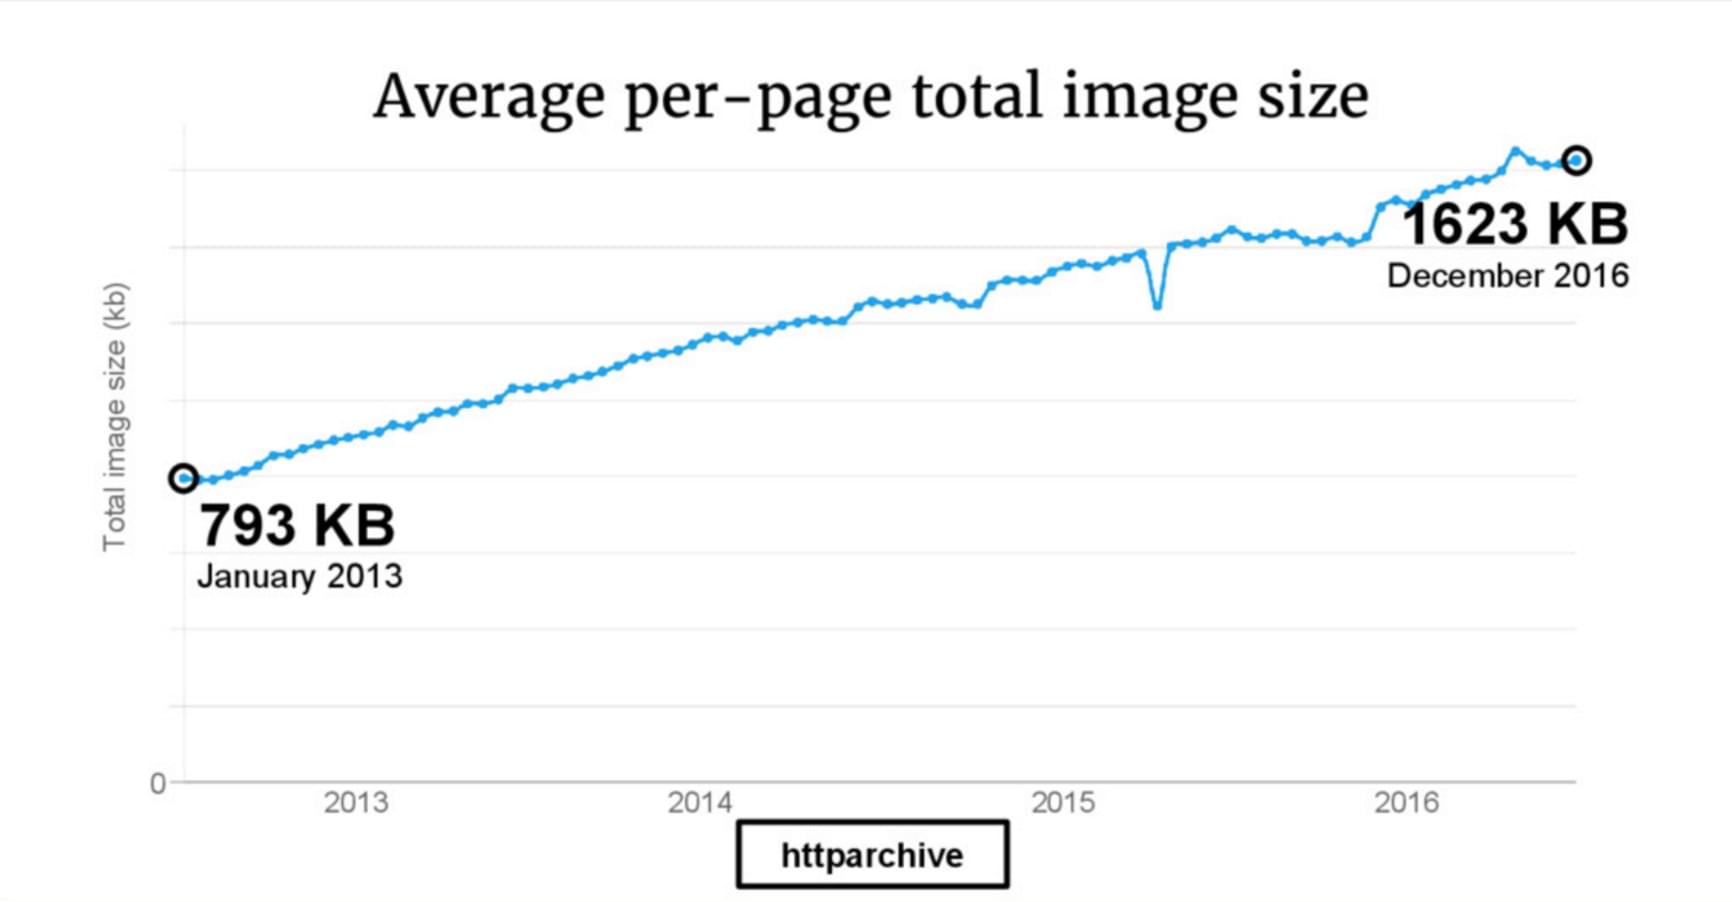 Average per-page total image size